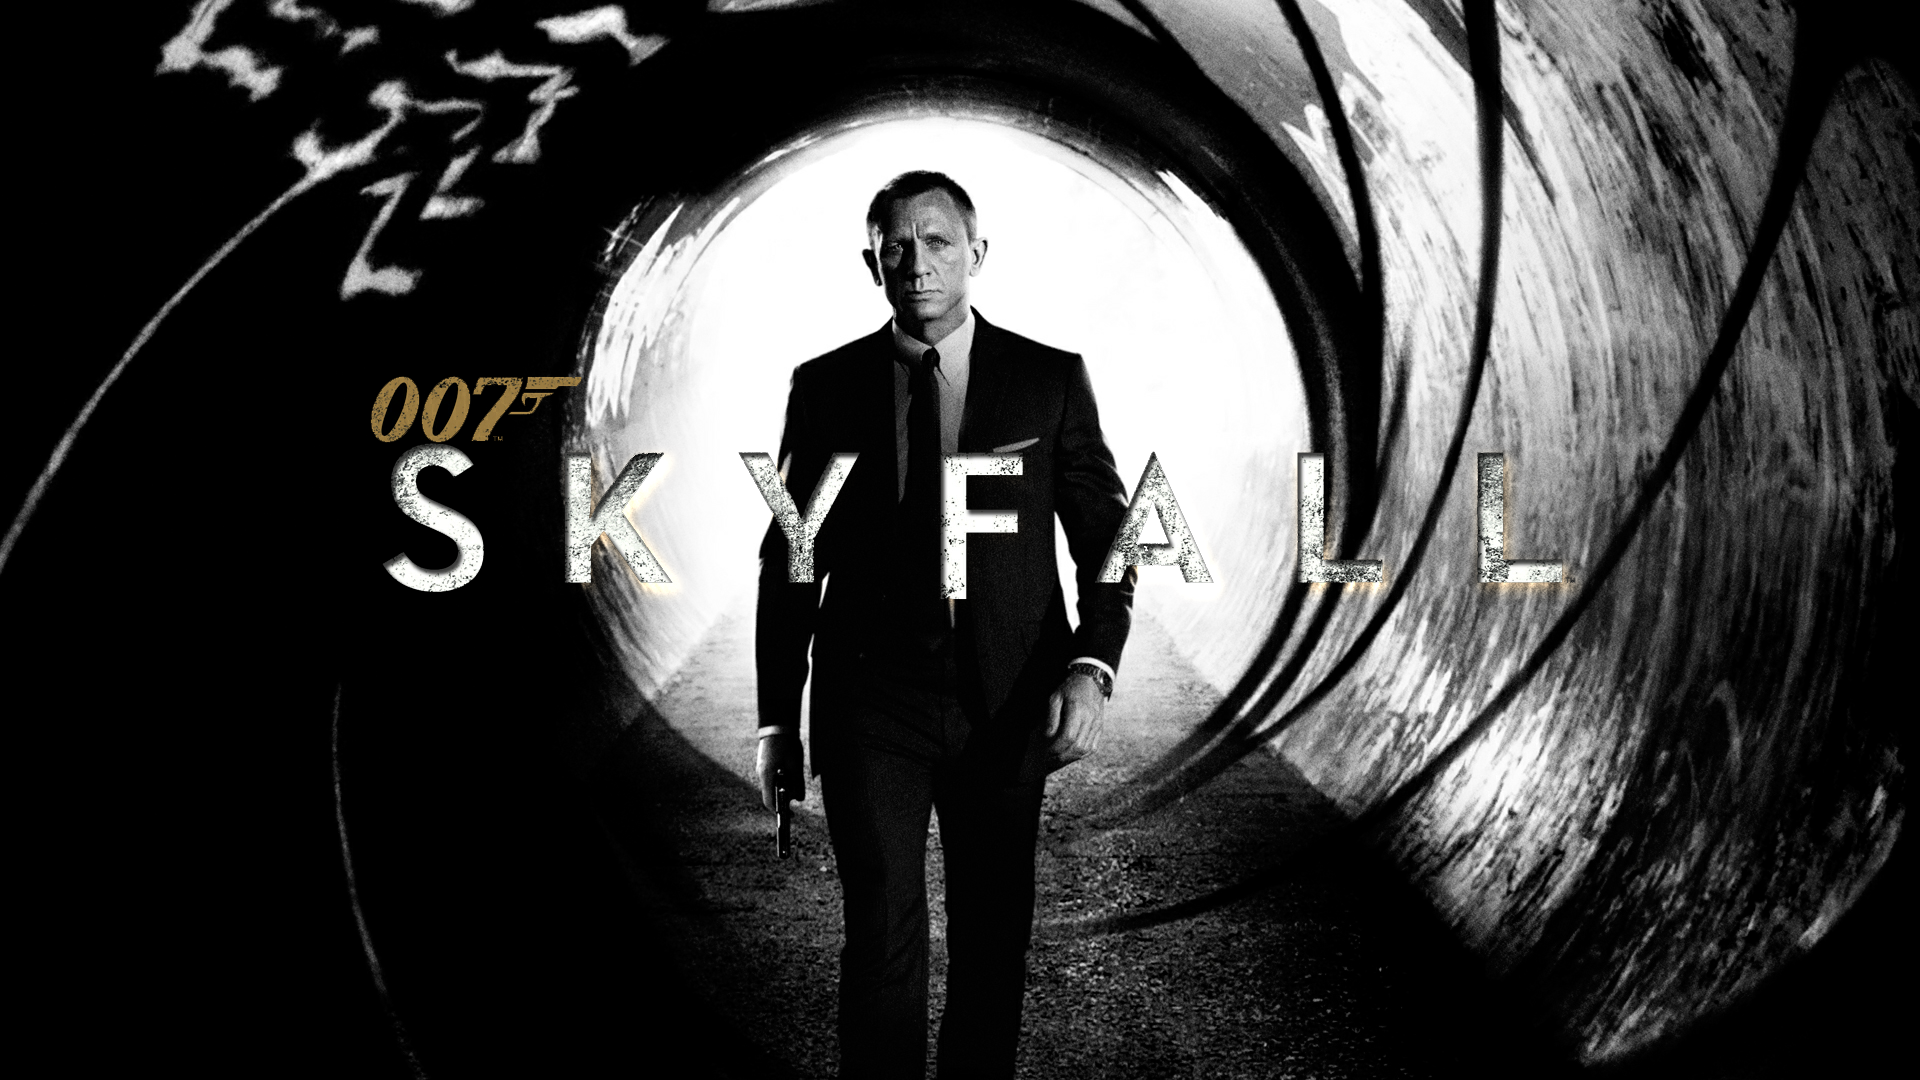 Skyfall download the new version for windows